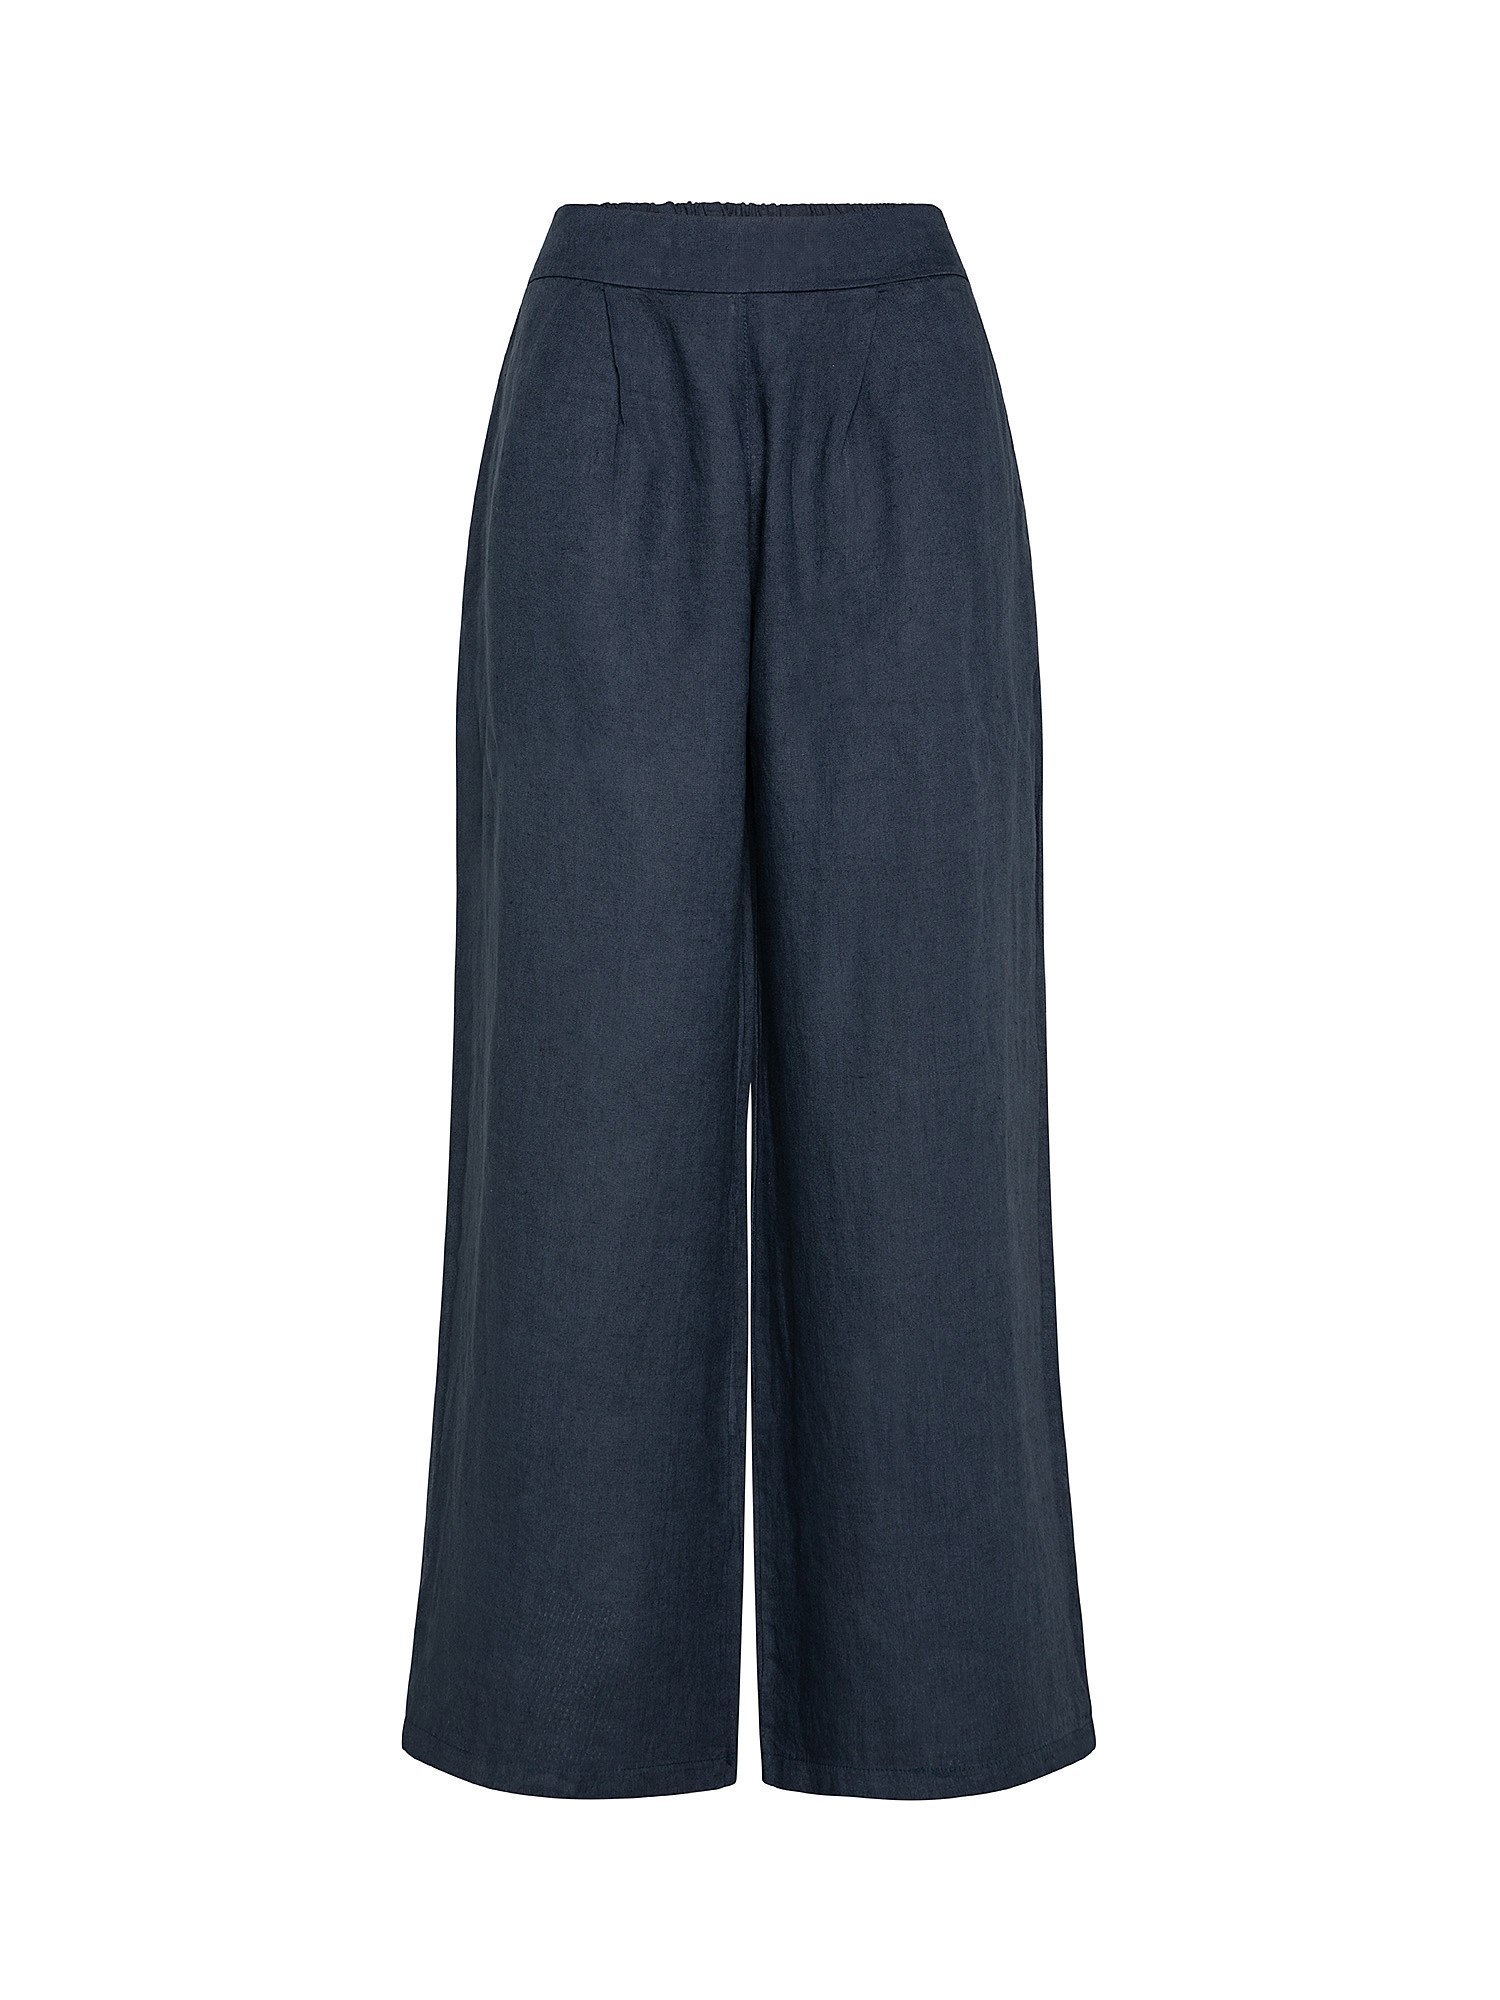 Wide pure linen trousers, Blue, large image number 0